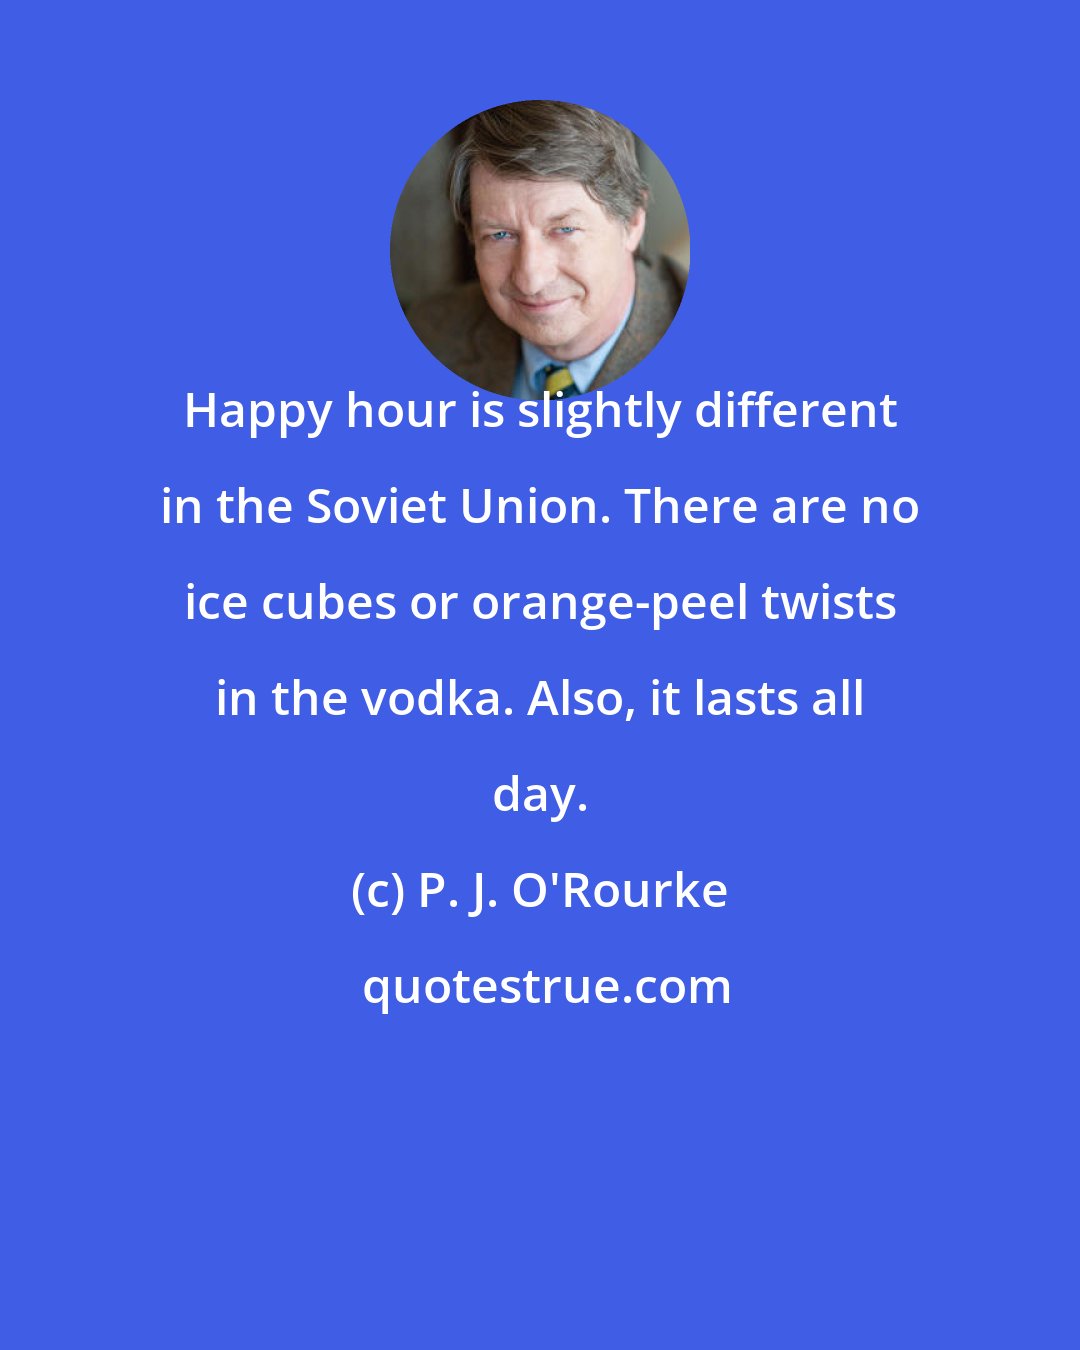 P. J. O'Rourke: Happy hour is slightly different in the Soviet Union. There are no ice cubes or orange-peel twists in the vodka. Also, it lasts all day.